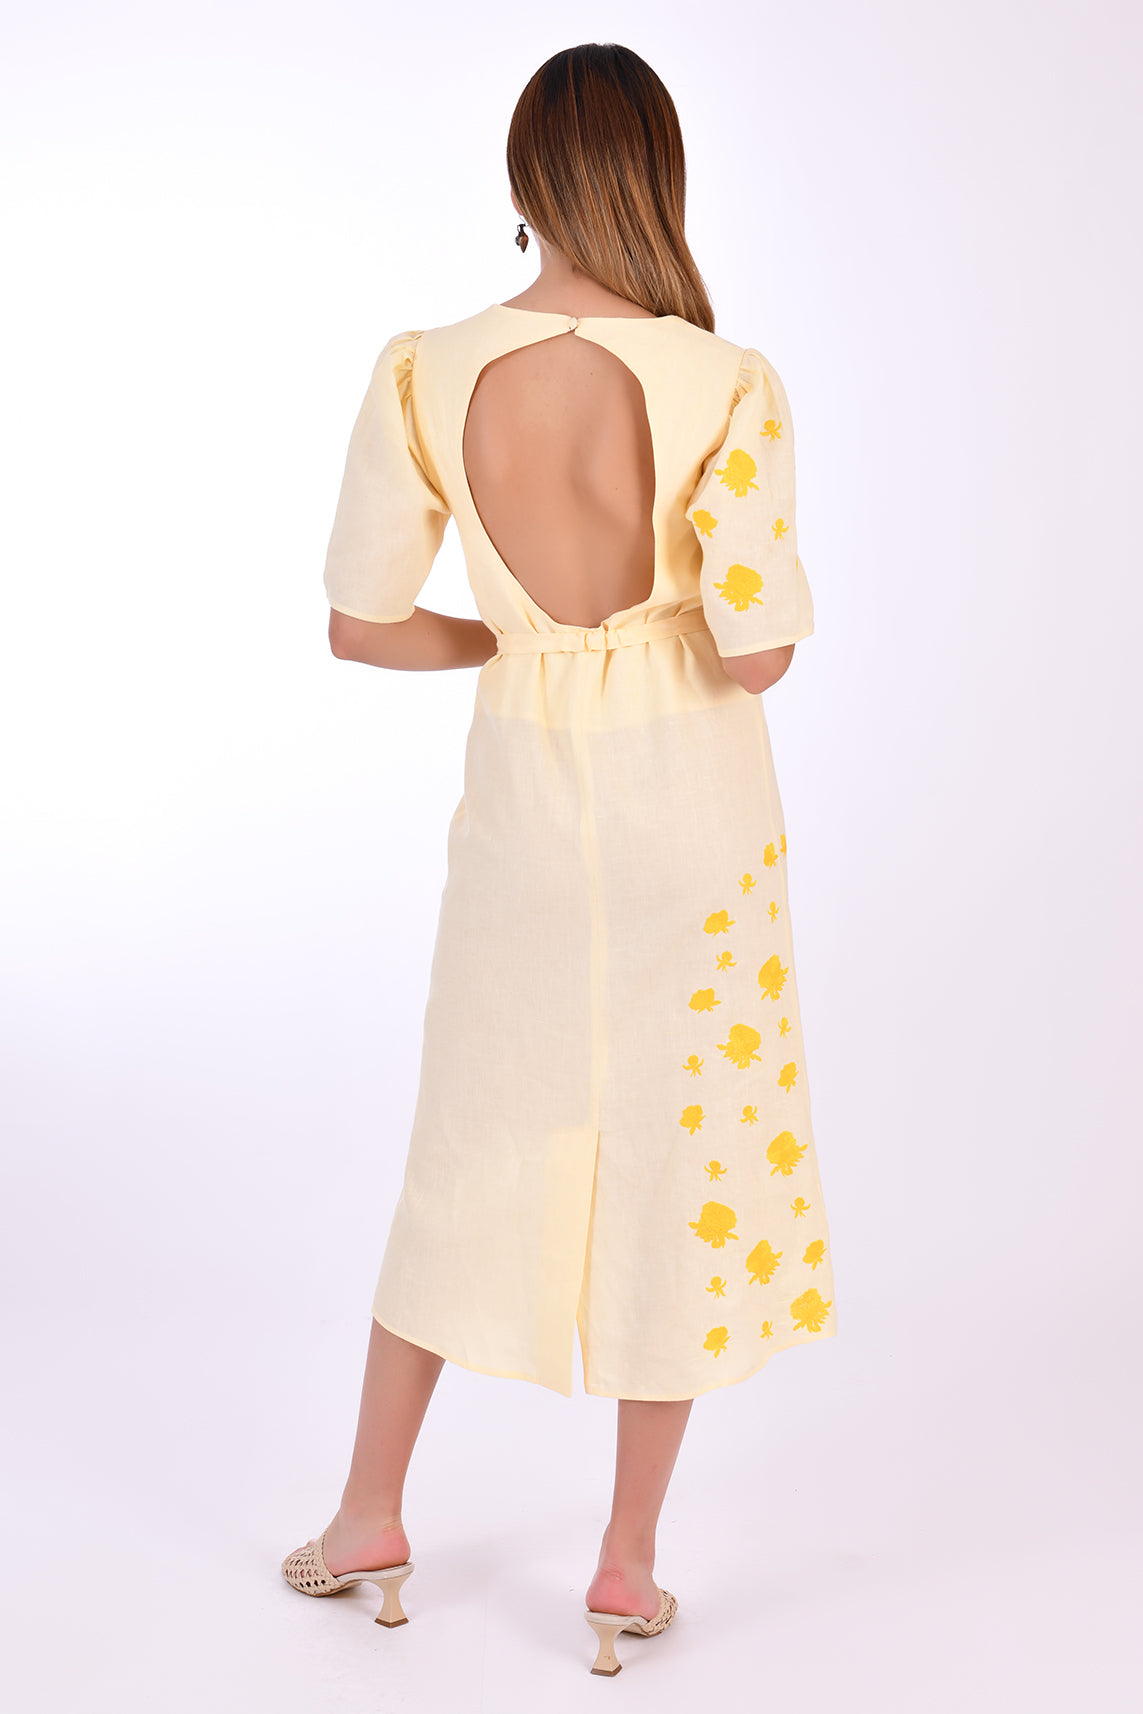 Fanm Mon Doga Midi Linen Dress, Back View Belted. Short Sleeve 100% Linen Dress, featuring a peephole open back and button closure. Round neck, with a belt for the waist (can be worn with or without), and features front embroidery detail.